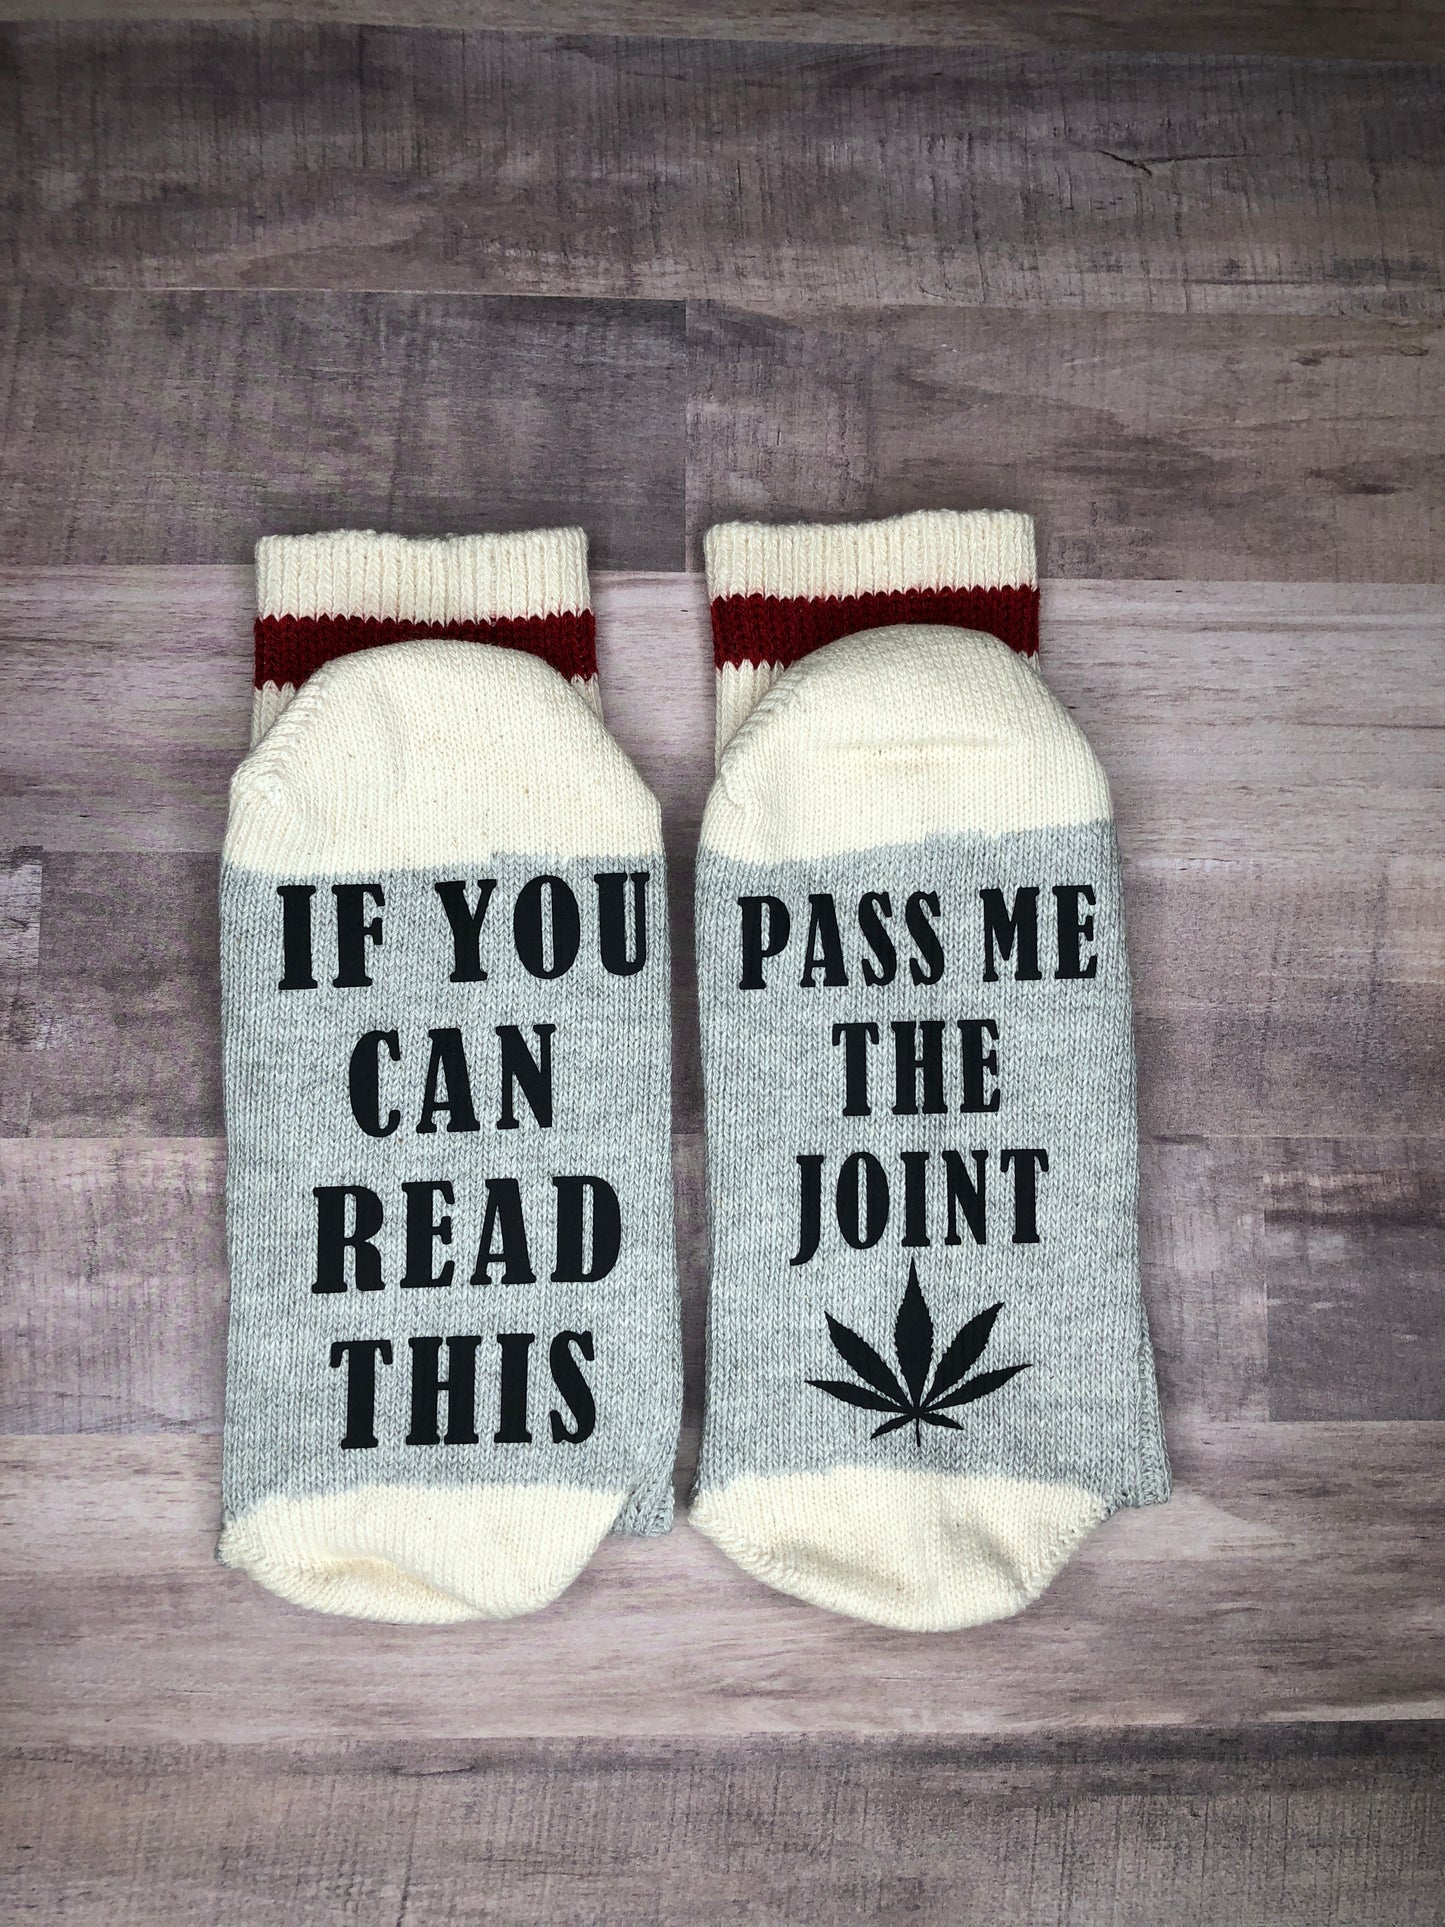 Pass Me the Joint